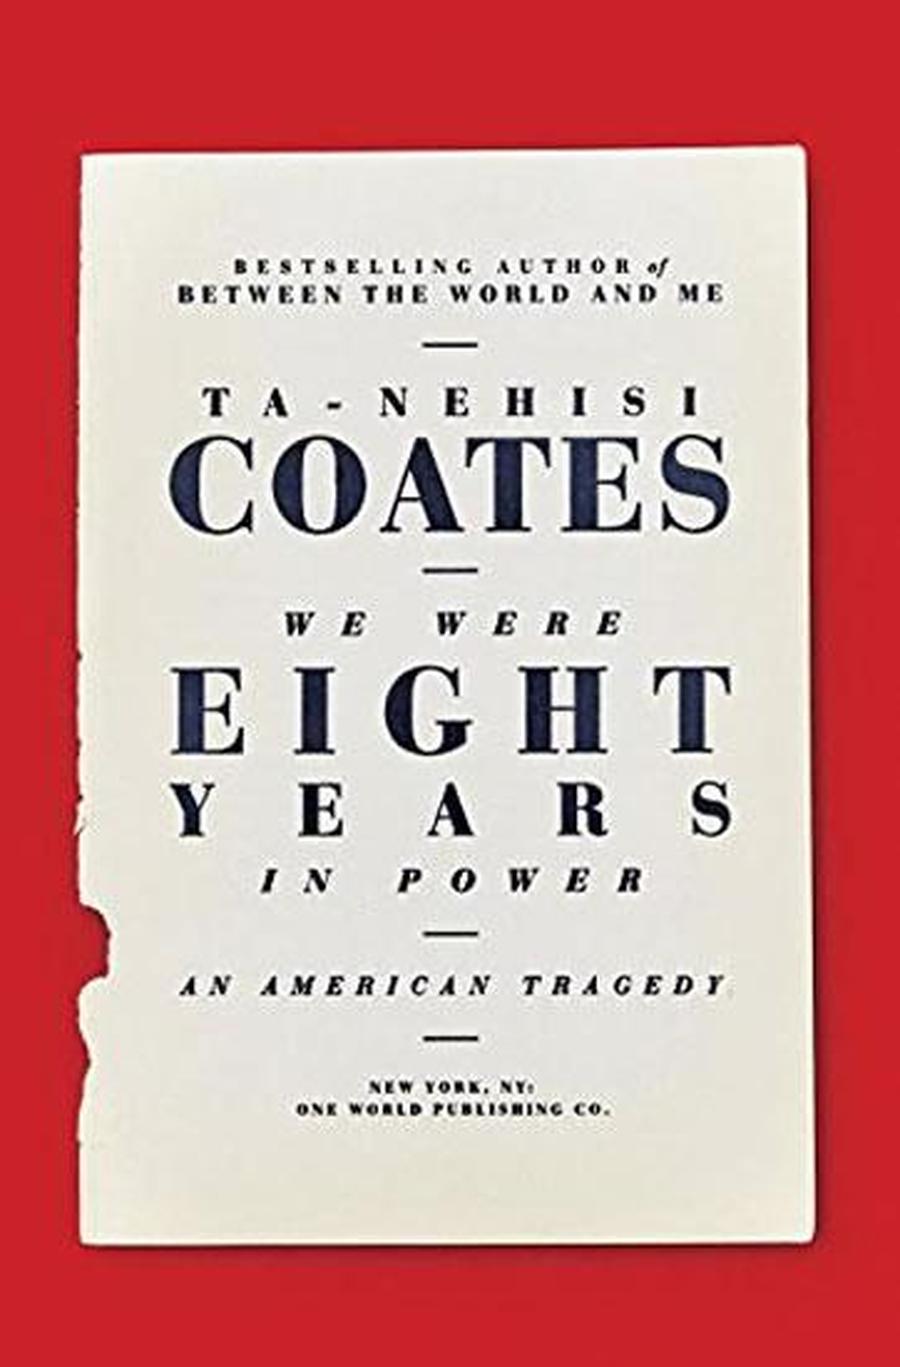 We Were Eight Years in Power: An Amerian Tragedy - Coates Ta-Nehisi